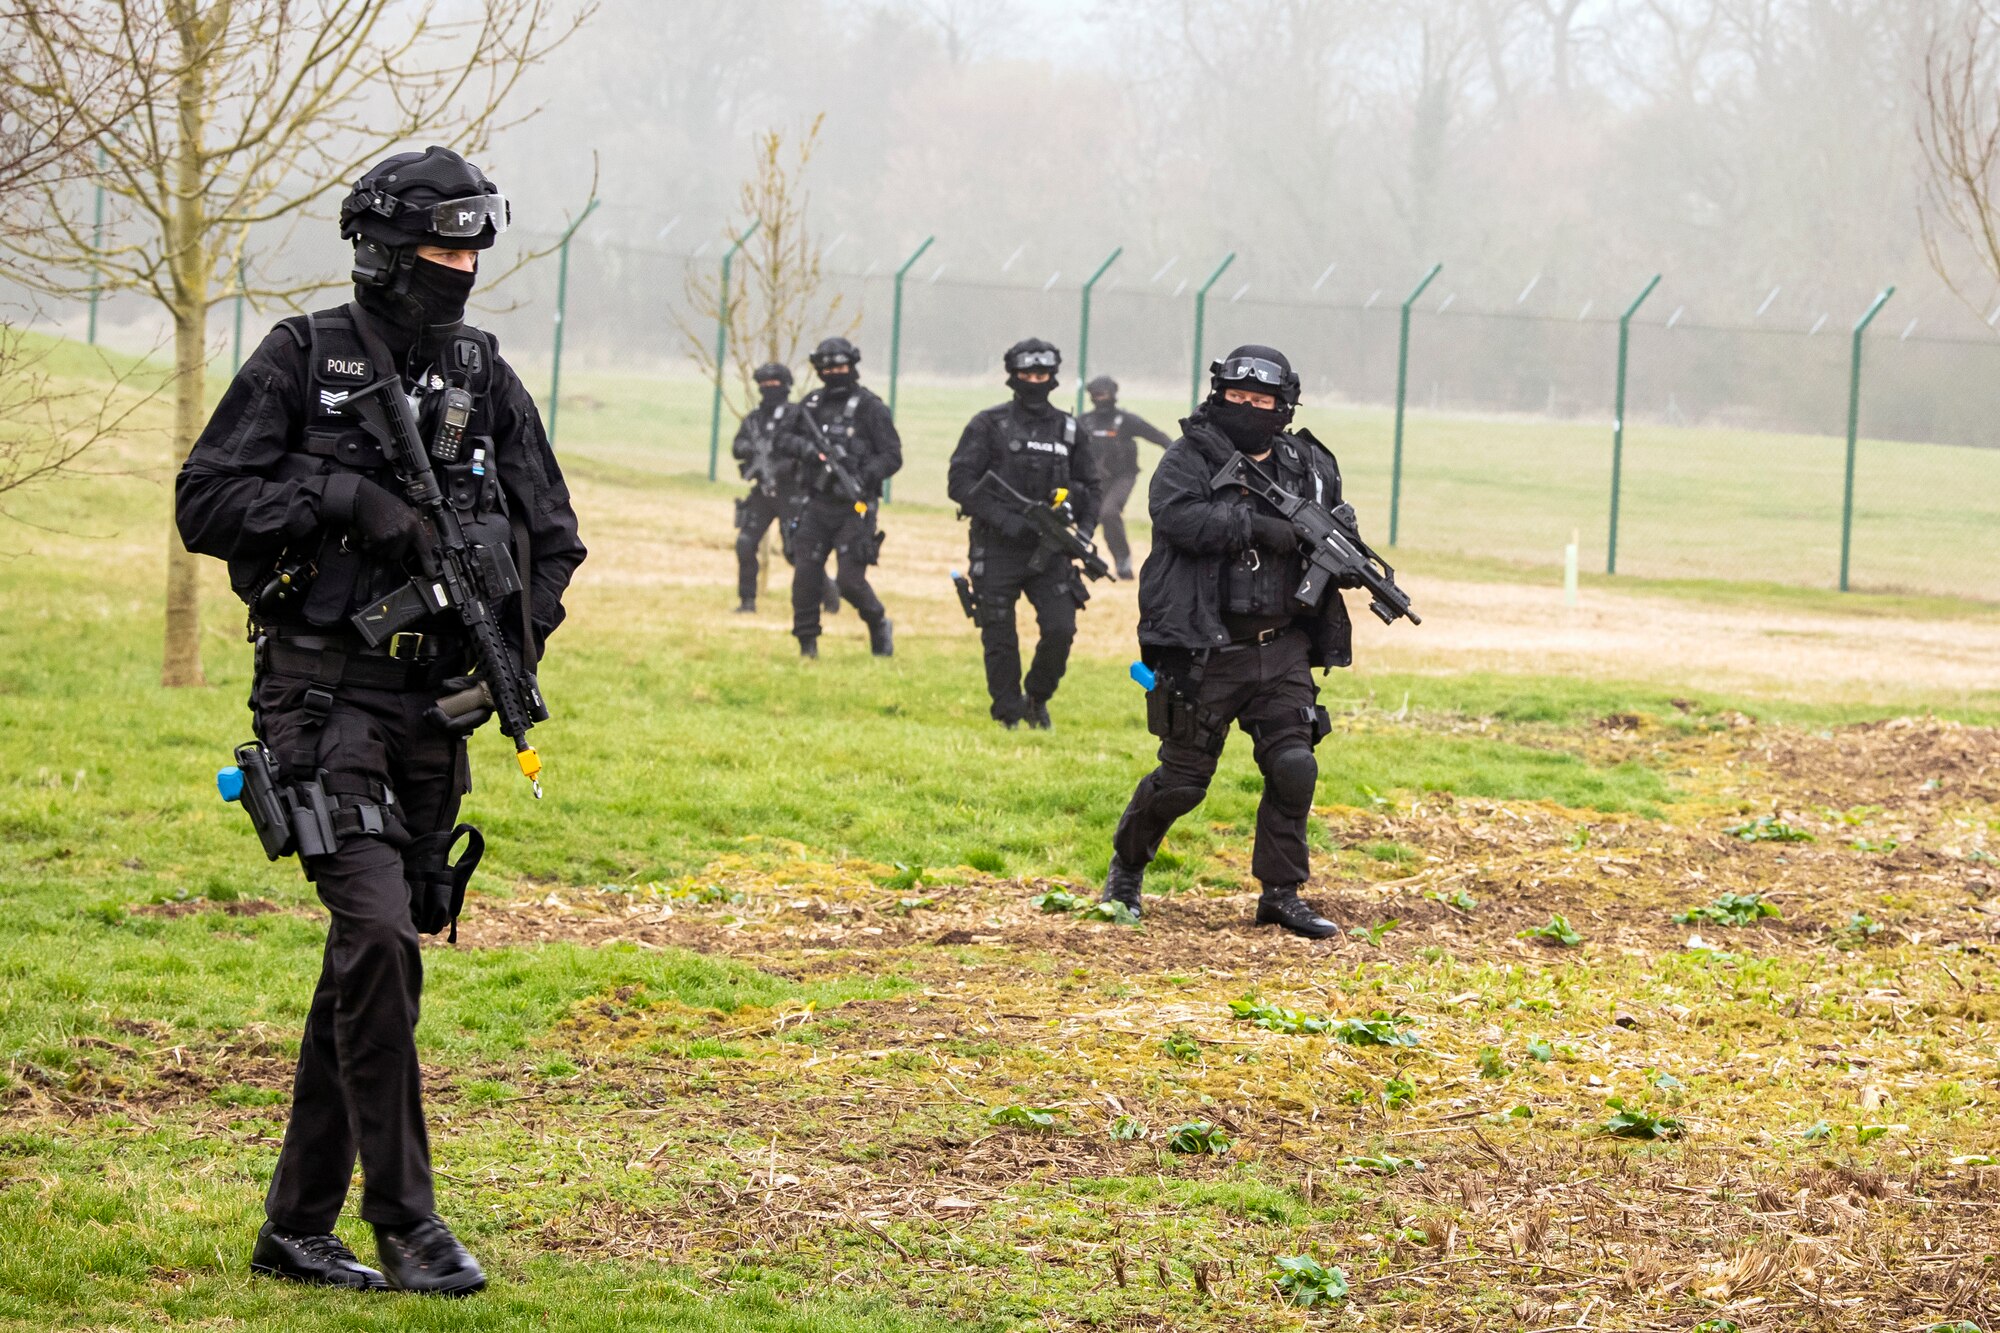 Policemen from the Northamptonshire Police Department conduct a field training exercise at RAF Croughton, England, Mar. 3, 2021. The NHPD utilized the 422d Security Forces Squadron training complex to help strengthen their tactics and techniques. Events like this help strengthen the local partnership between the 422d SFS and the NHPD. (U.S. Air Force photo by Senior Airman Eugene Oliver)